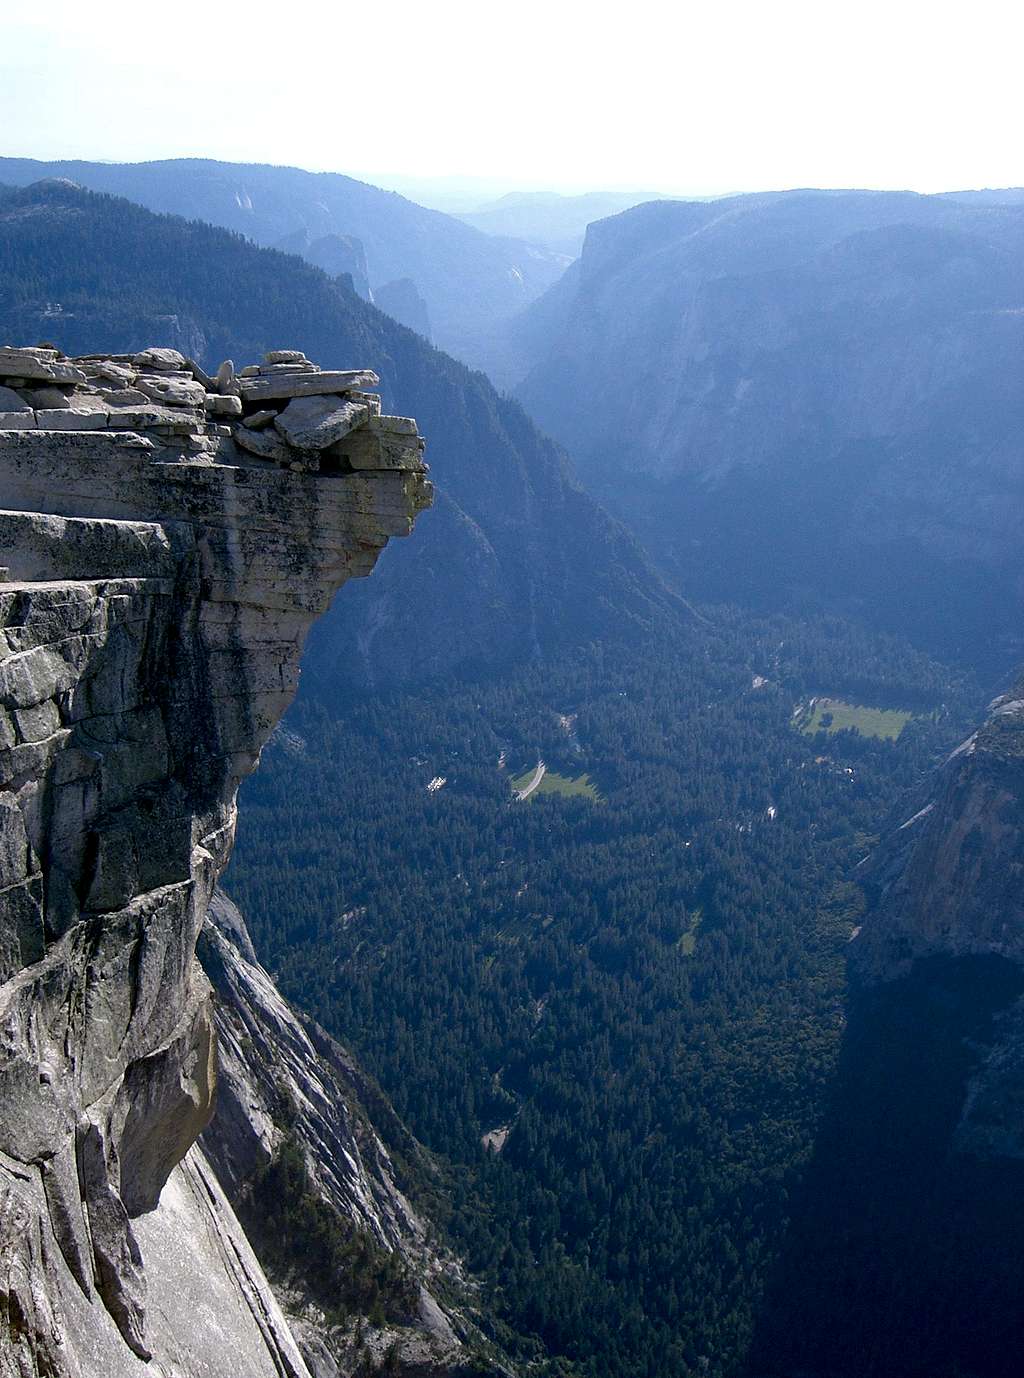 Yosemite Valley from Half Dome